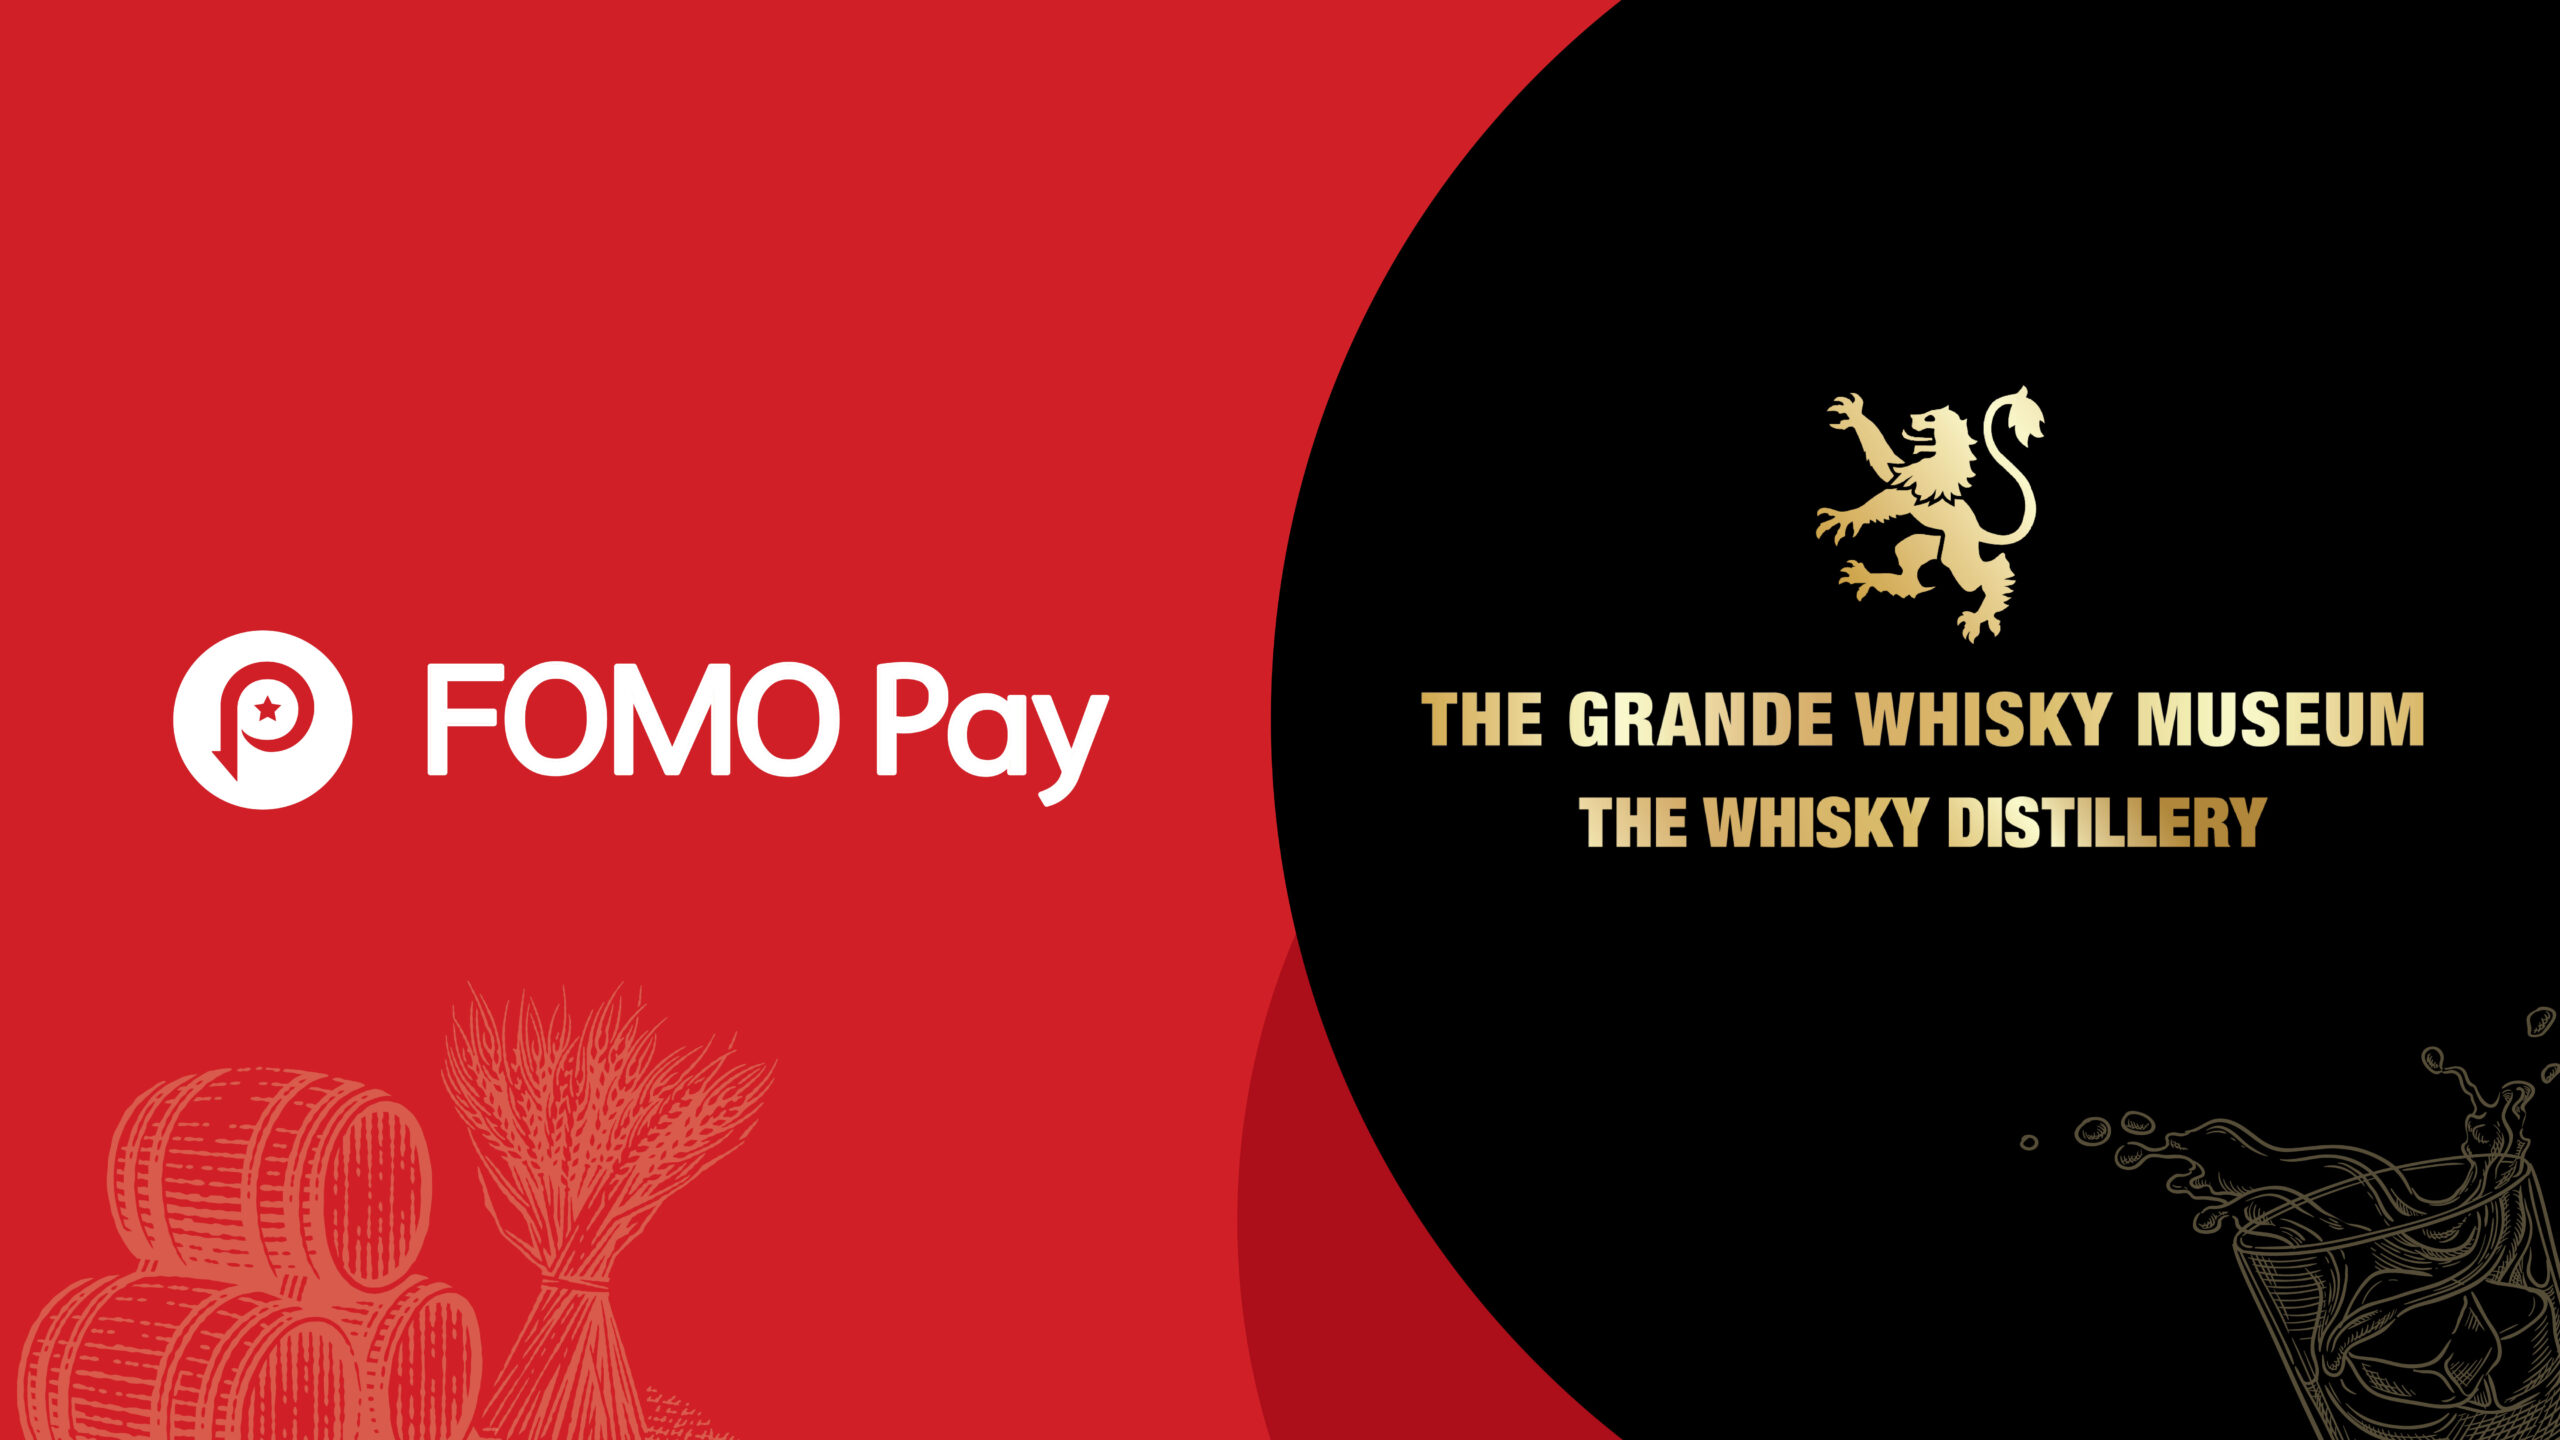 FOMO Pay and The Whisky Distillery forge partnership to elevate the premium whisky experience